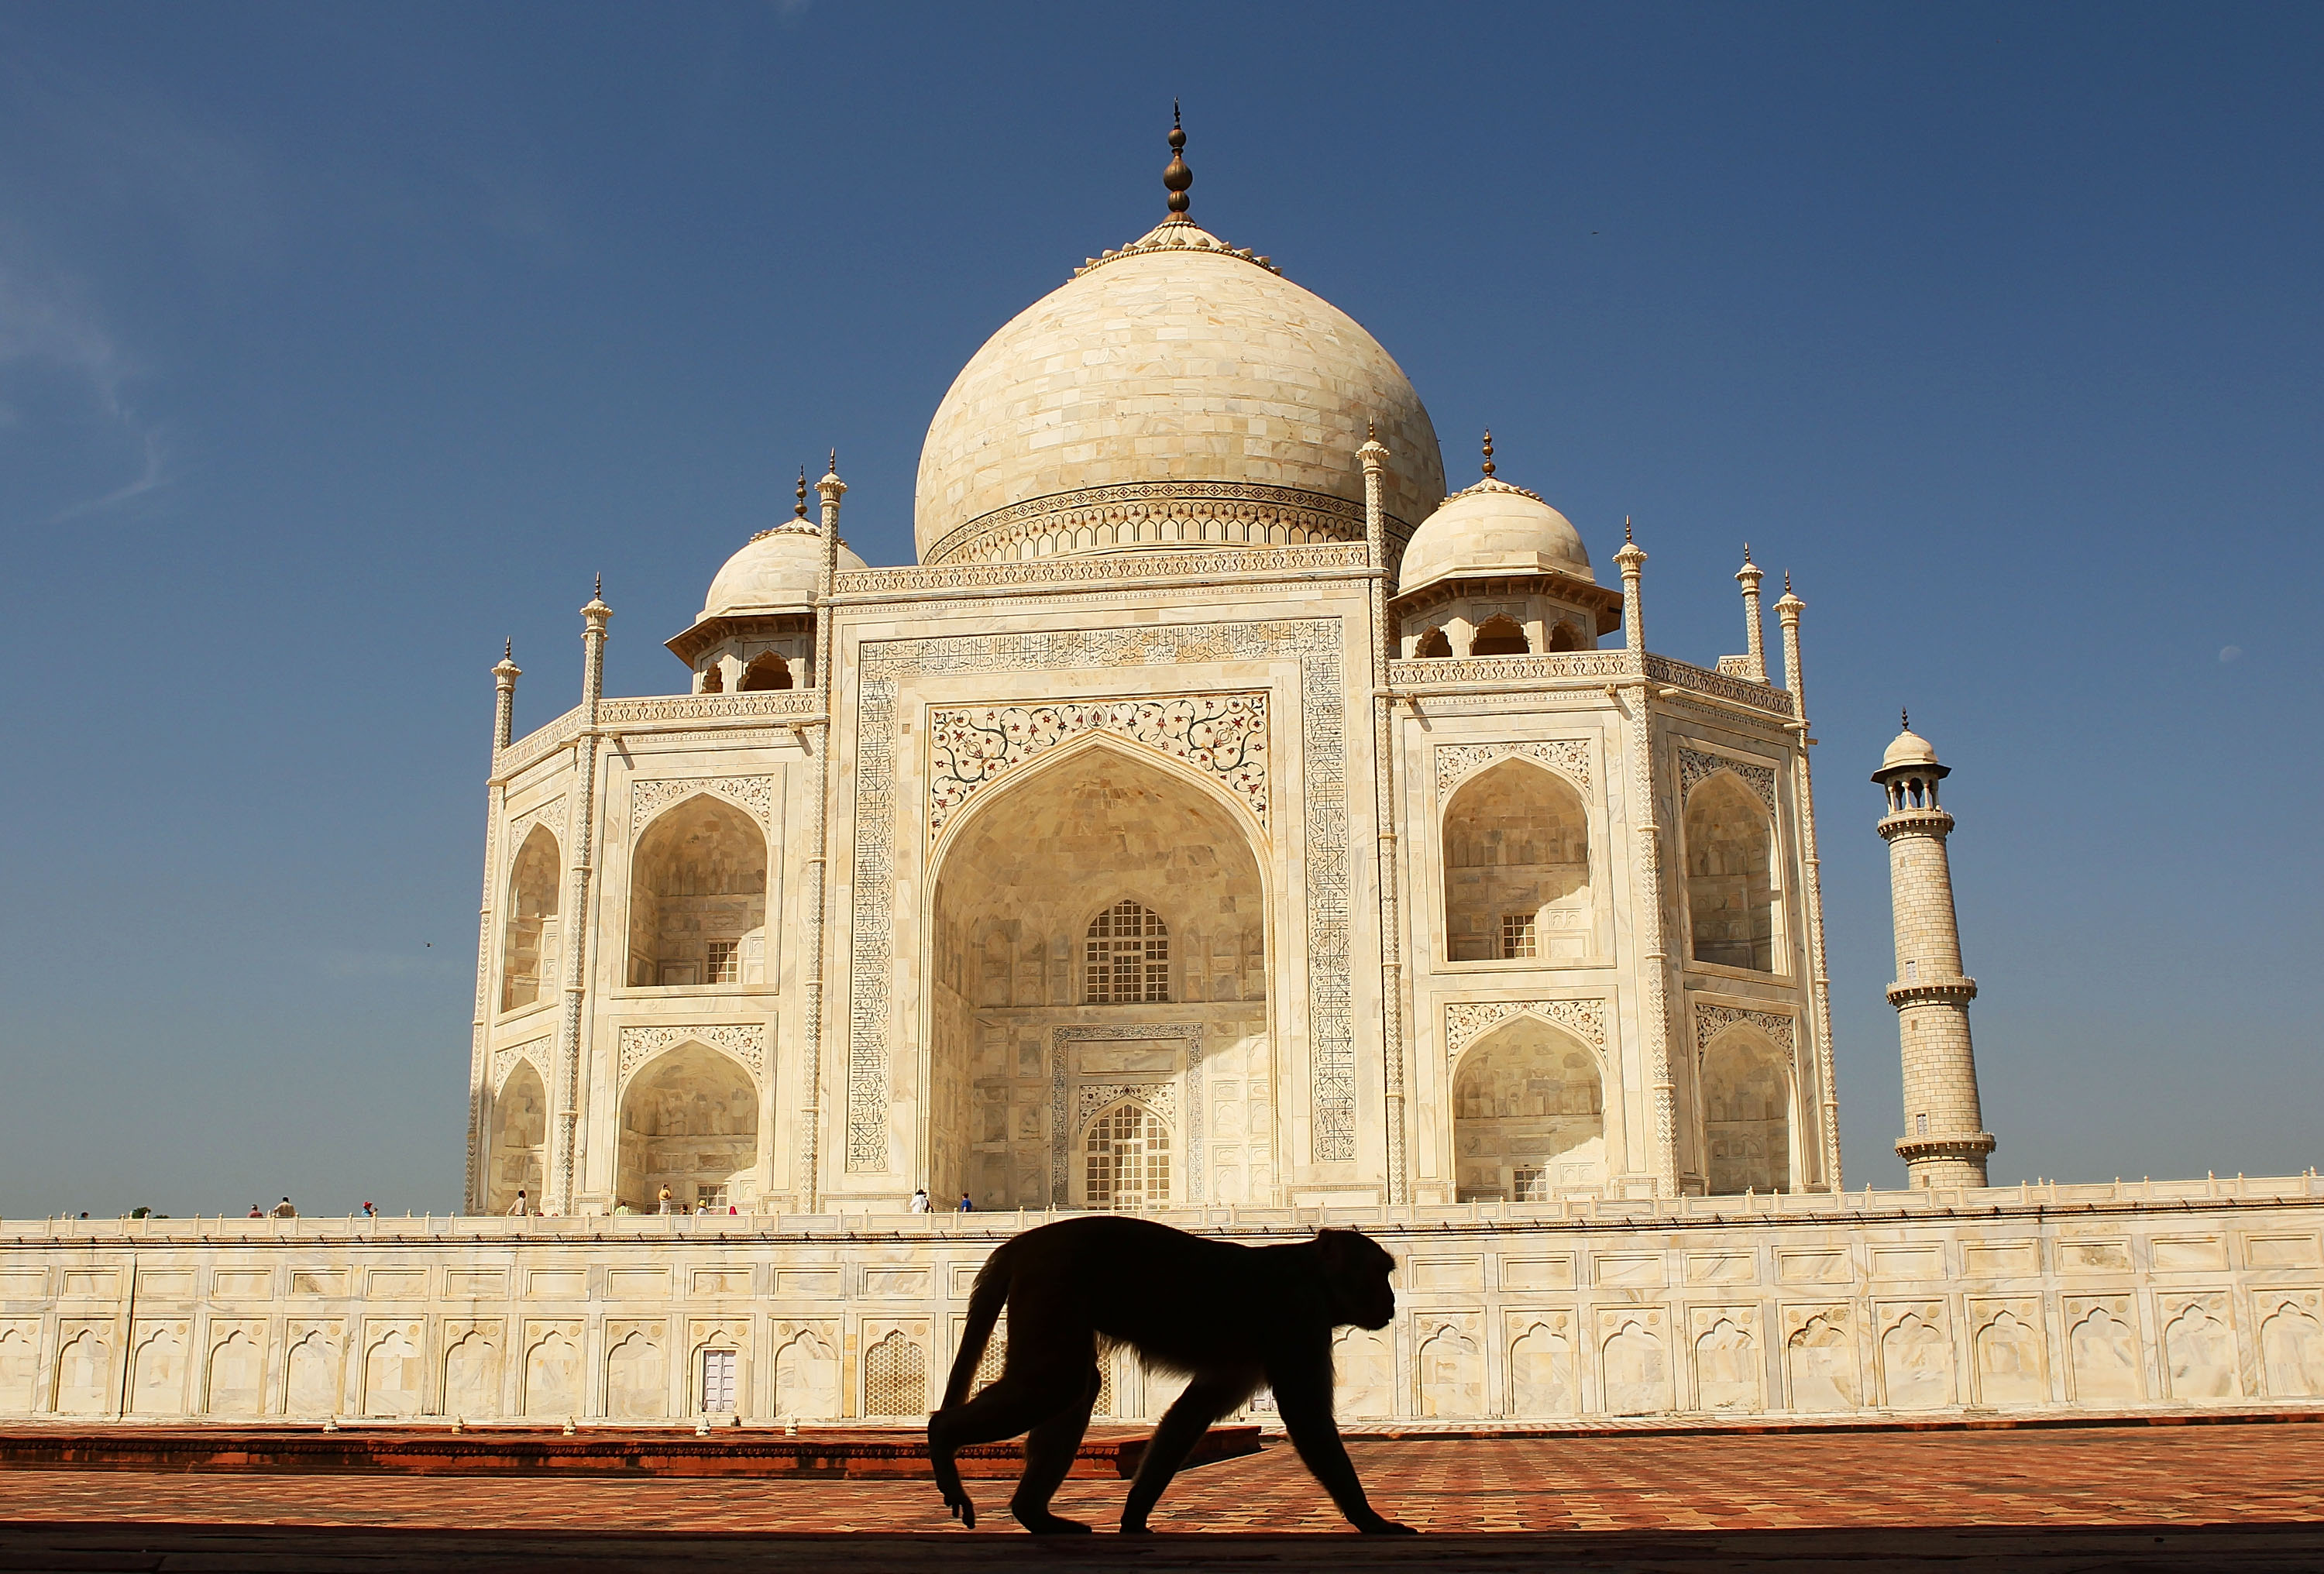 <p>AGRA, INDIA &#8211; SEPTEMBER 29:  A monkey walks past the Taj Mahal on September 29, 2010 in Agra, India. Completed in 1643, the mausoleum was built by th Mughal emperor Shah Jahan in memory of his third wife, Mumtaz Mahal, who is buried there alongside Jahan.  (Photo by Matt King/Getty Images)</p>
